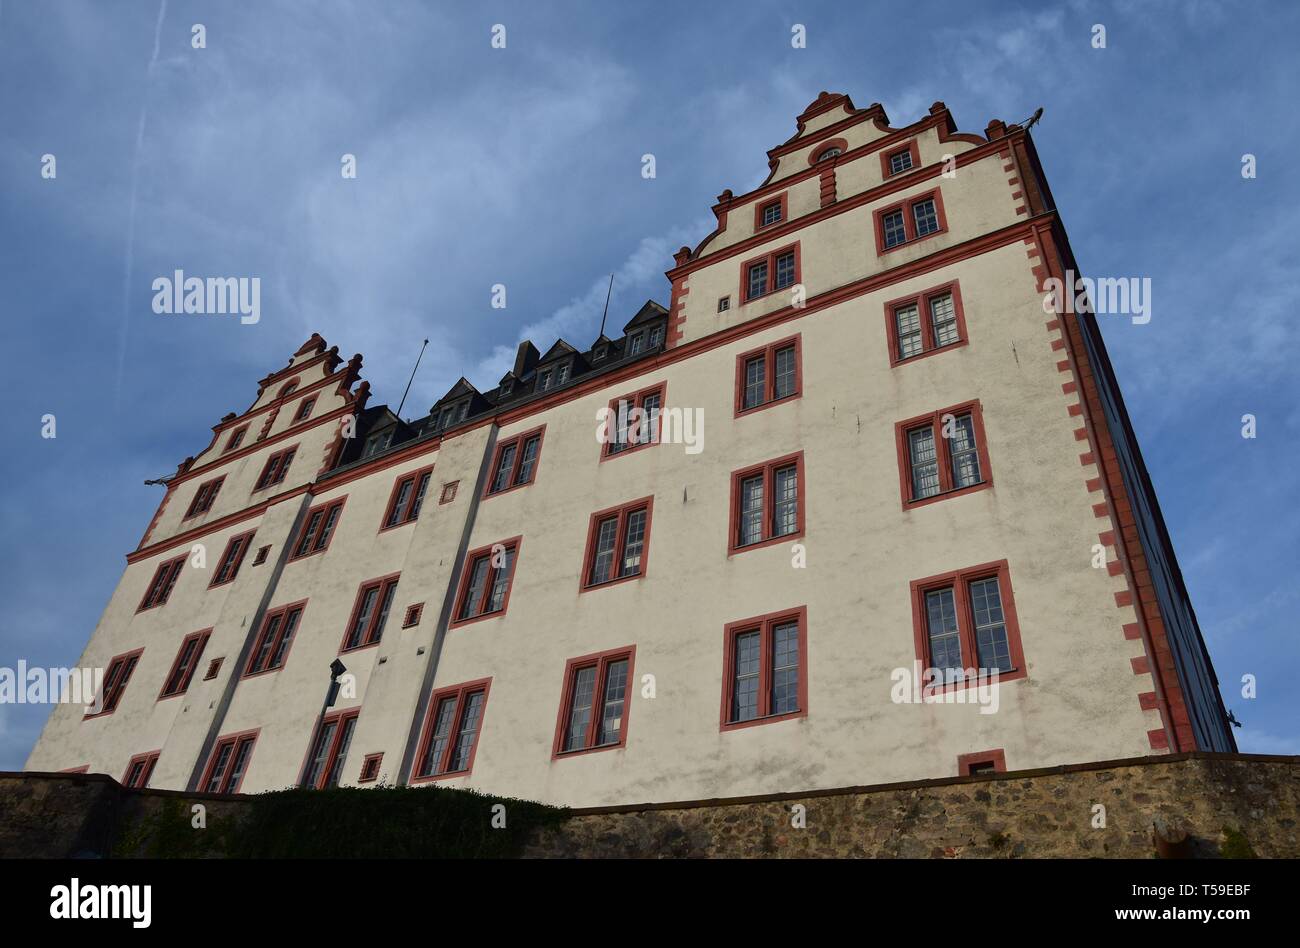 Lichtenberg Castle in the evening light. View from below. Fischbachtal, Odenwald, Germany. Stock Photo